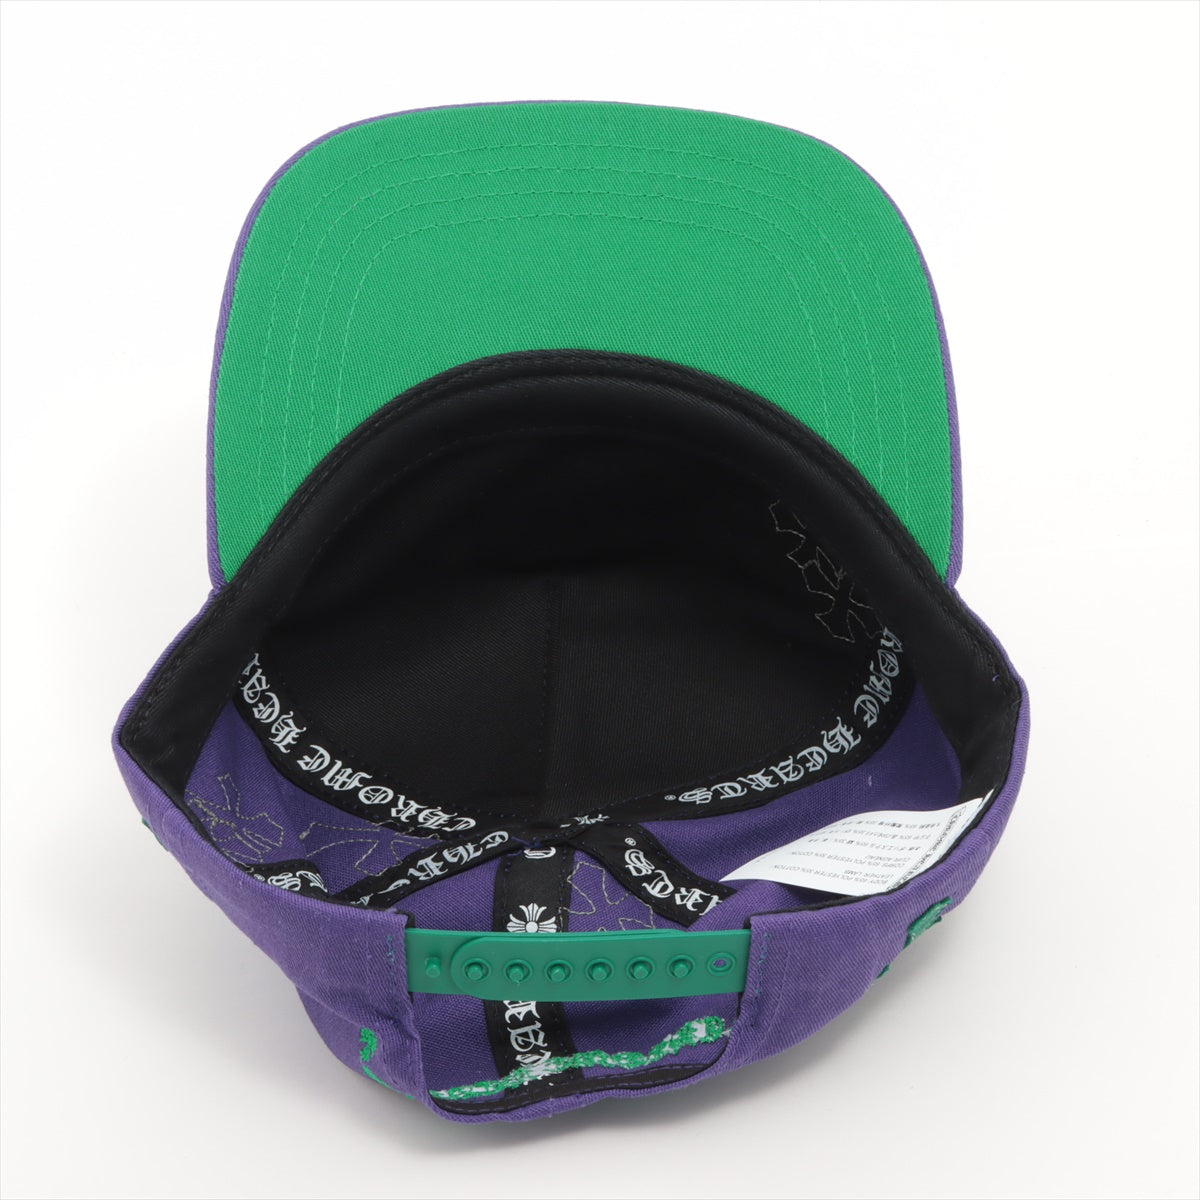 Chrome Hearts baseball cap Cotton & Polyester ONE SIZE purple x green with cross patch